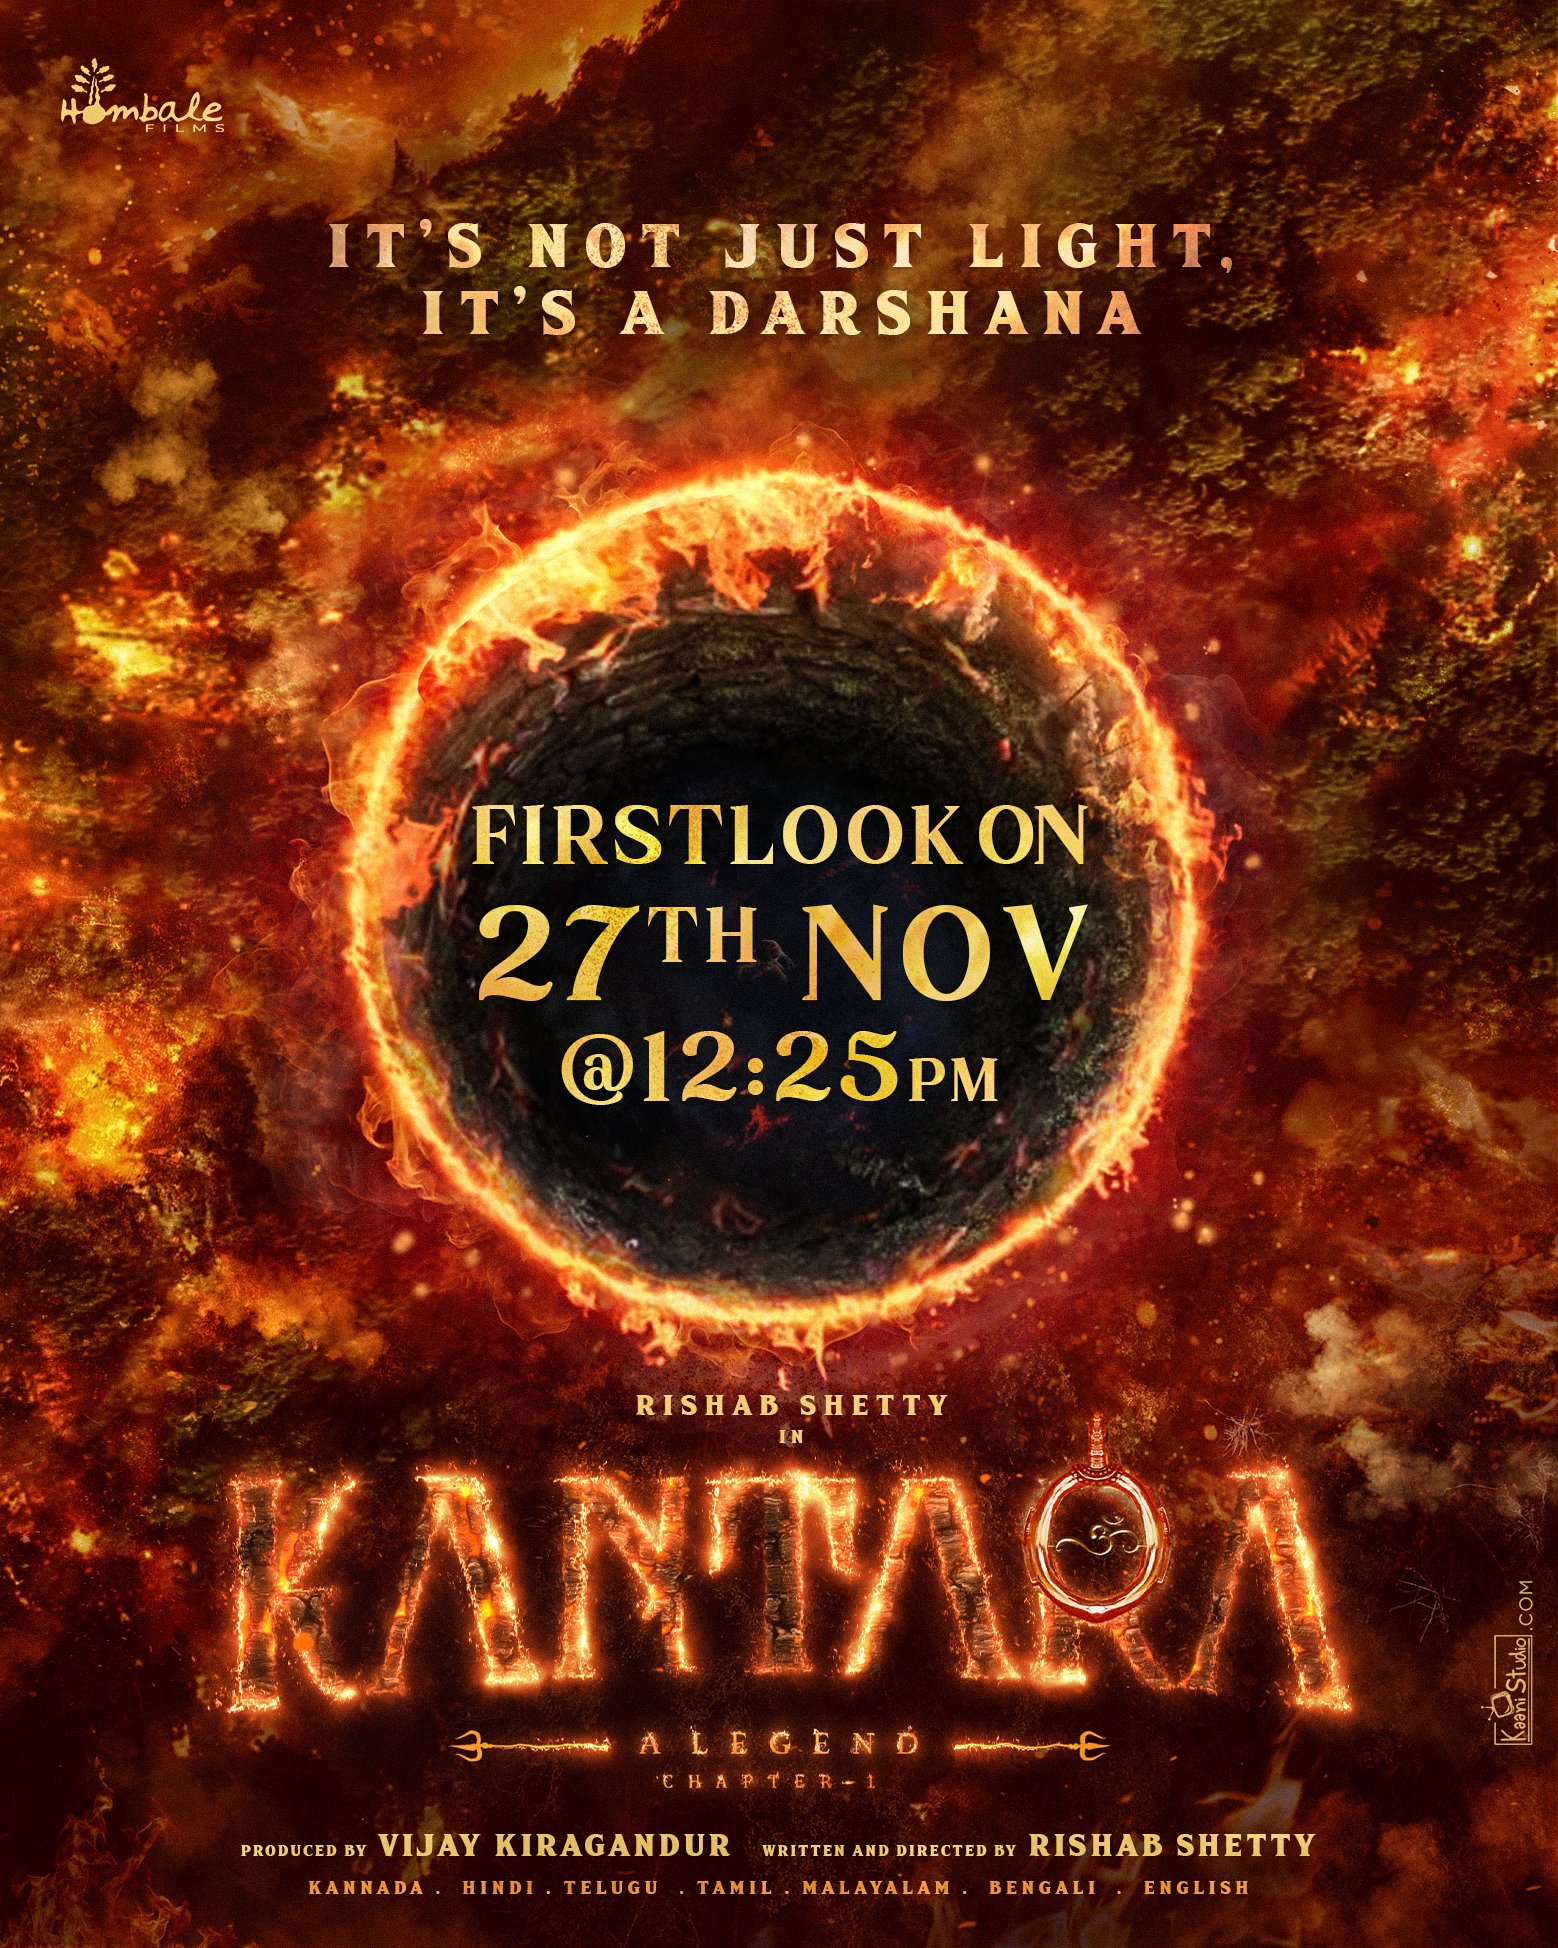 Kantara Chapter 1: First look of Rishab Shetty film’s prequel to be out on November 27th !